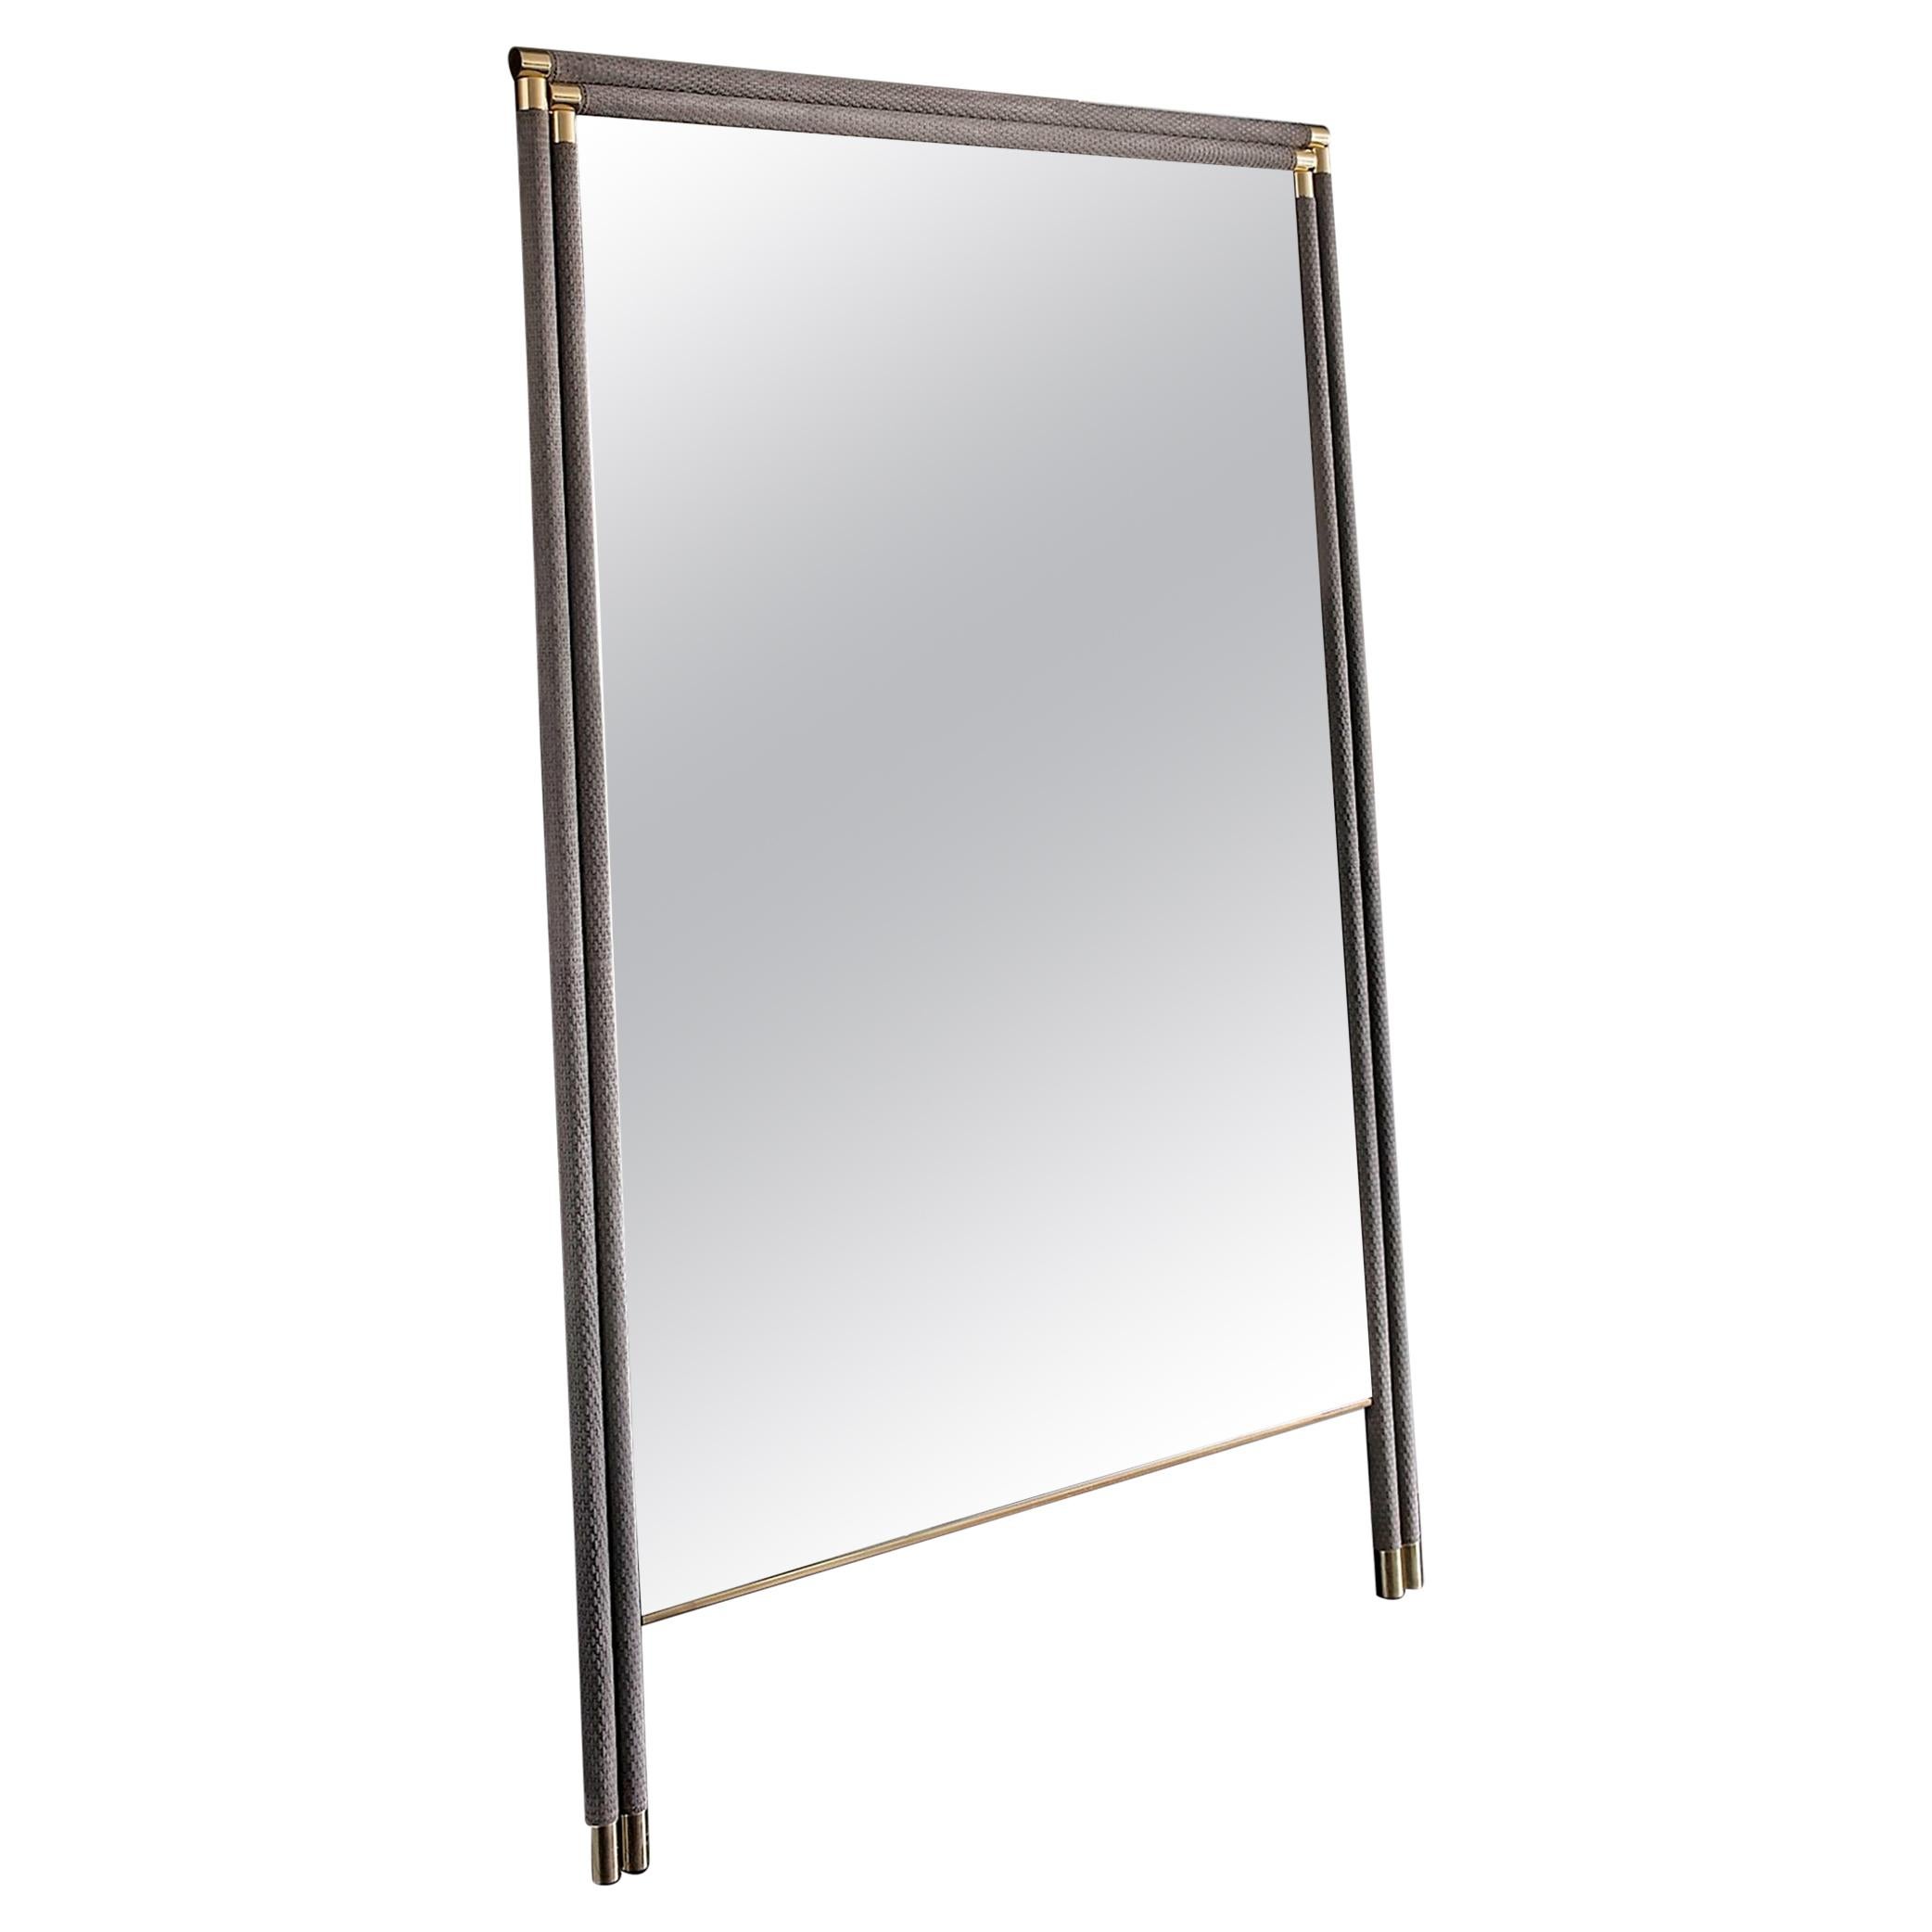 Floor Smart Mirror with Genuine Leather Frame